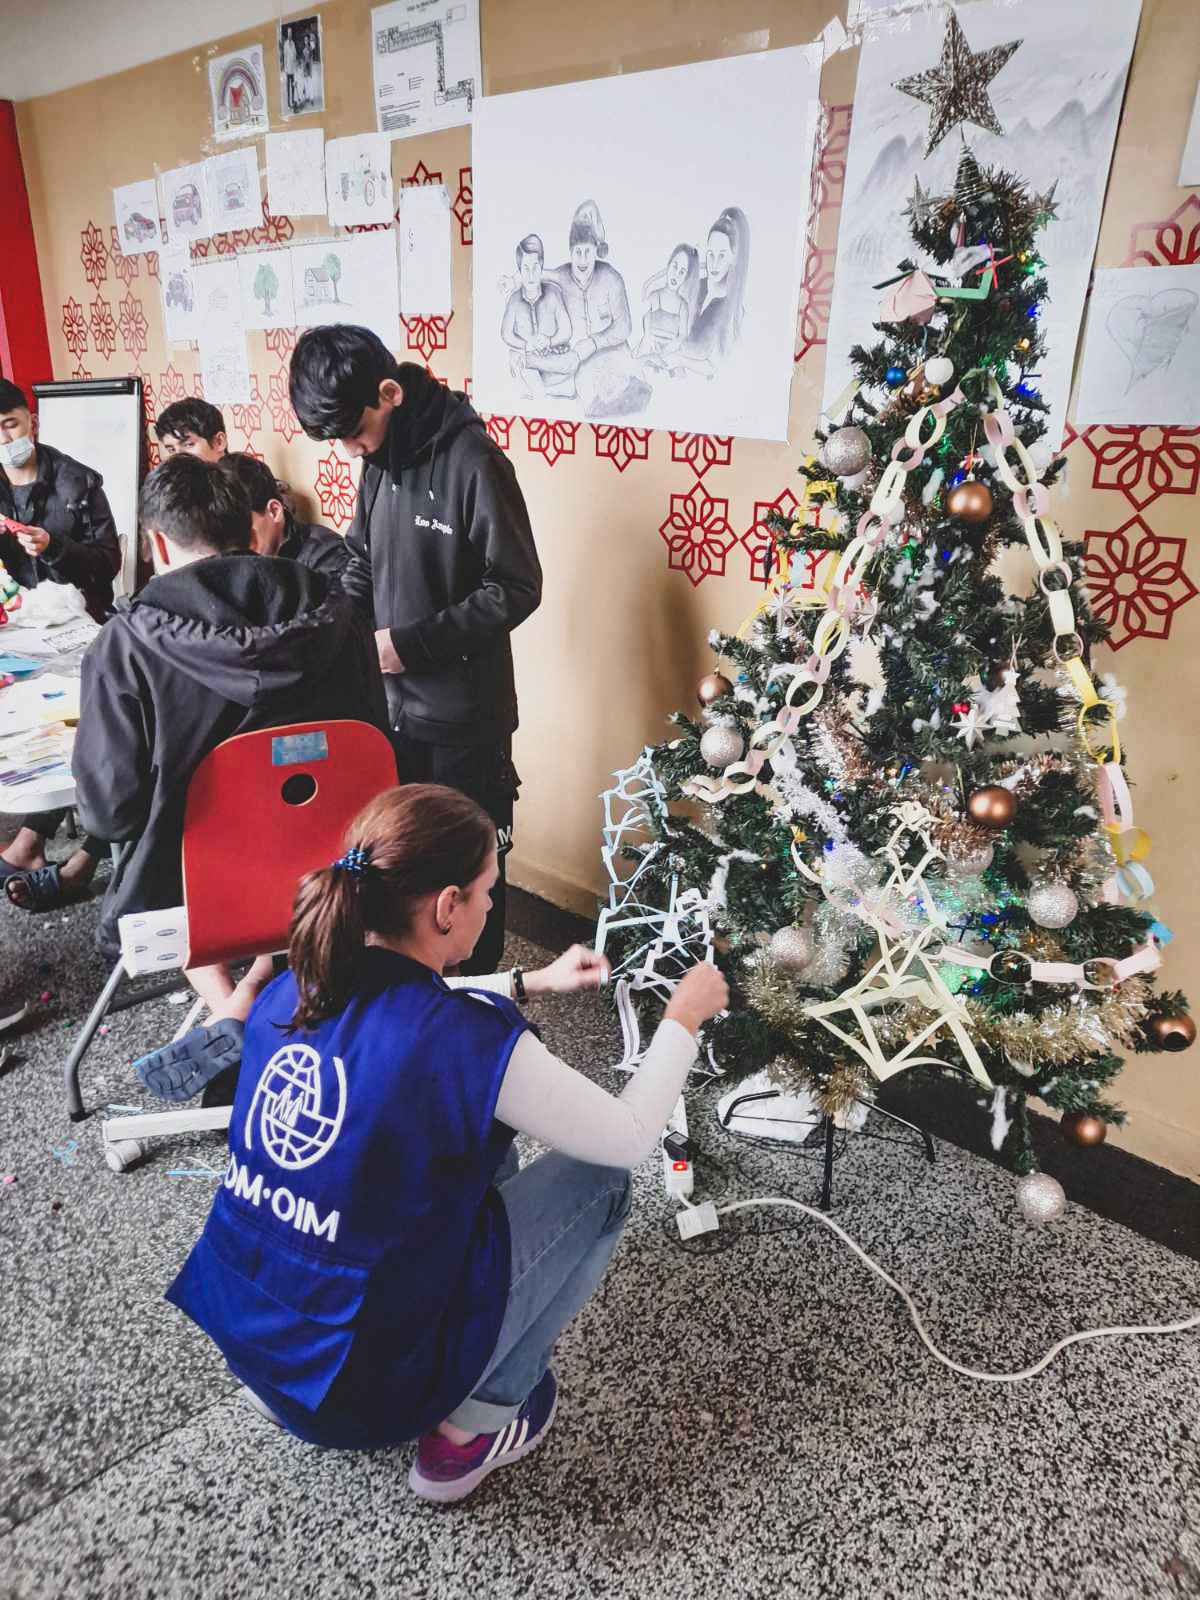 unaccompanied minors making Christmas decoration and an IOM team member